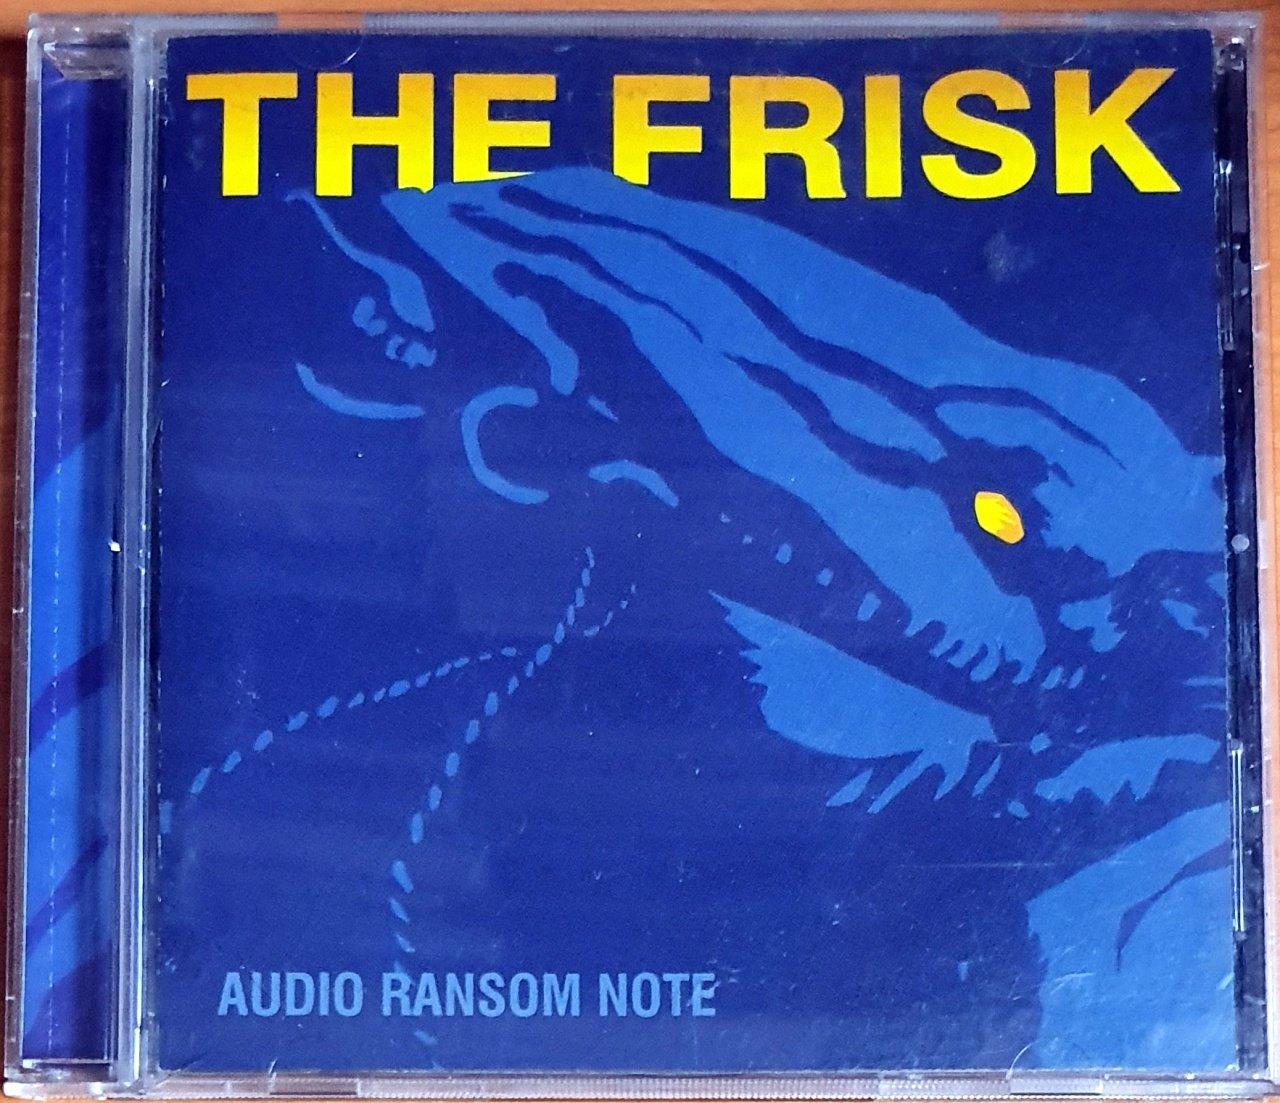 THE FRISK - AUDIO RANSOM NOTE (2003) - CD ADELINE RECORDS  2.EL